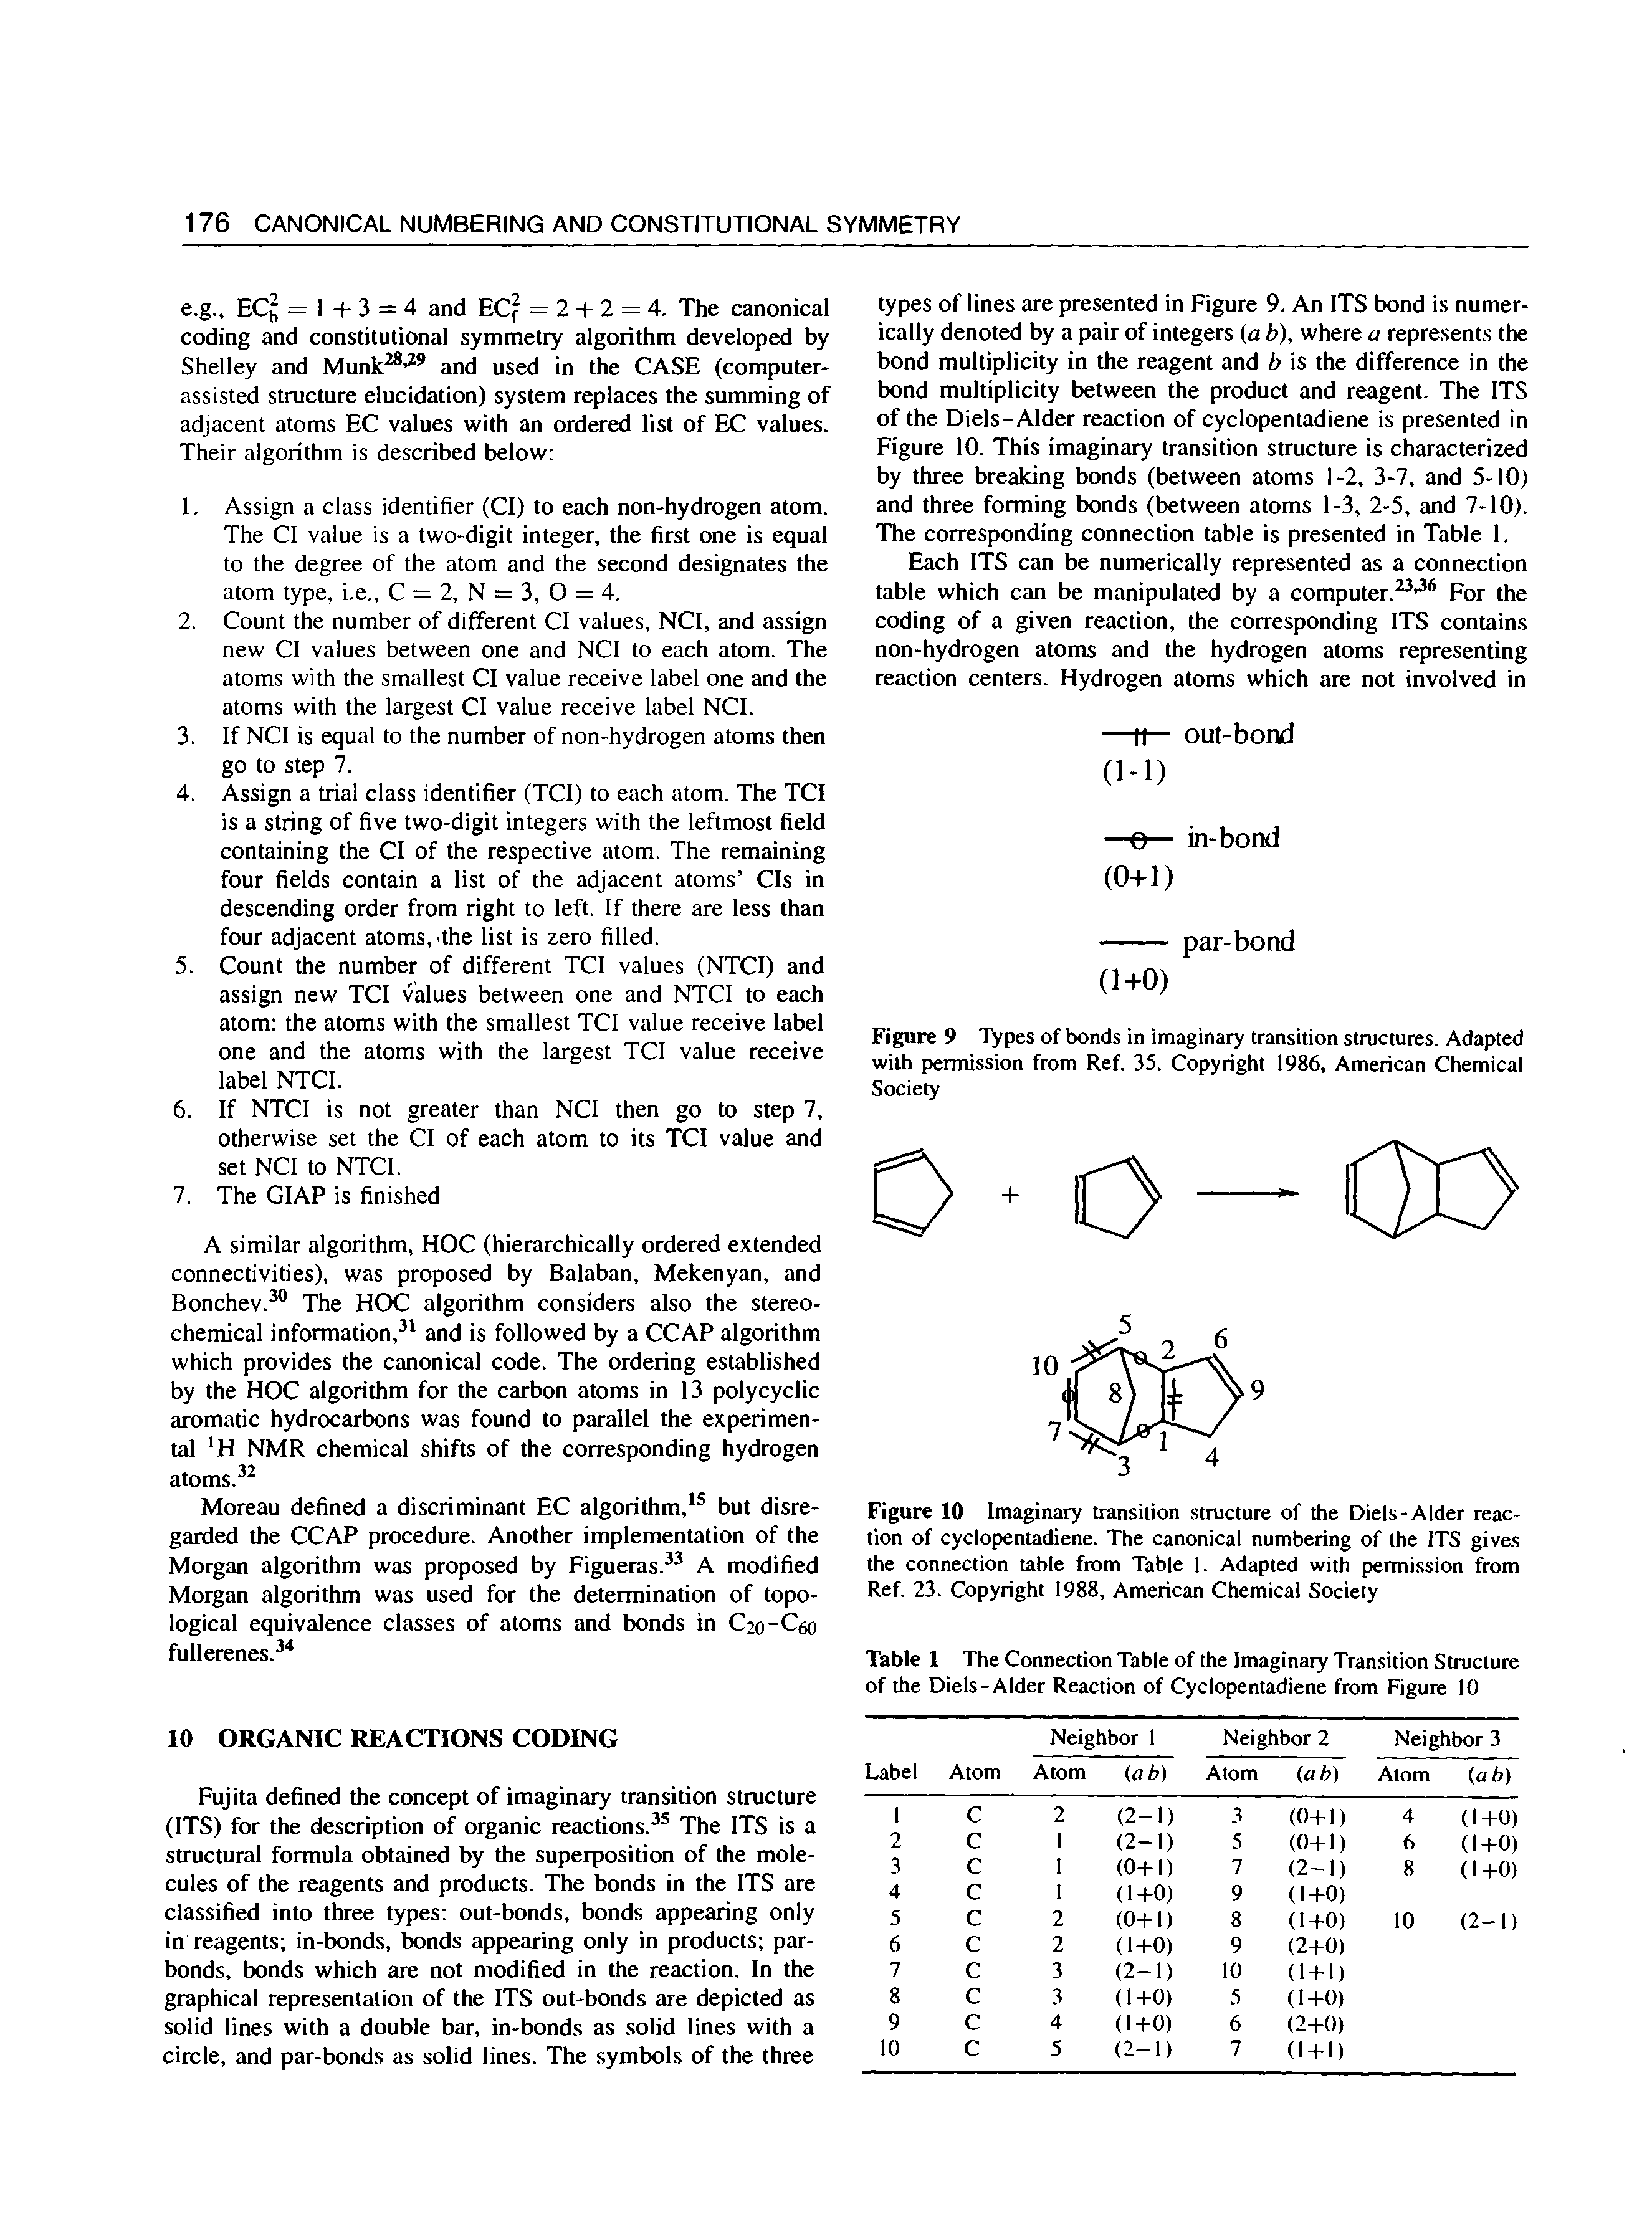 Figure 10 Imaginary transition structure of the Diels-Alder reaction of cyclopentadiene. The canonical numbering of the ITS gives the connection table from Table 1. Adapted with permission from Ref. 23. Copyright 1988, American Chemical Society...